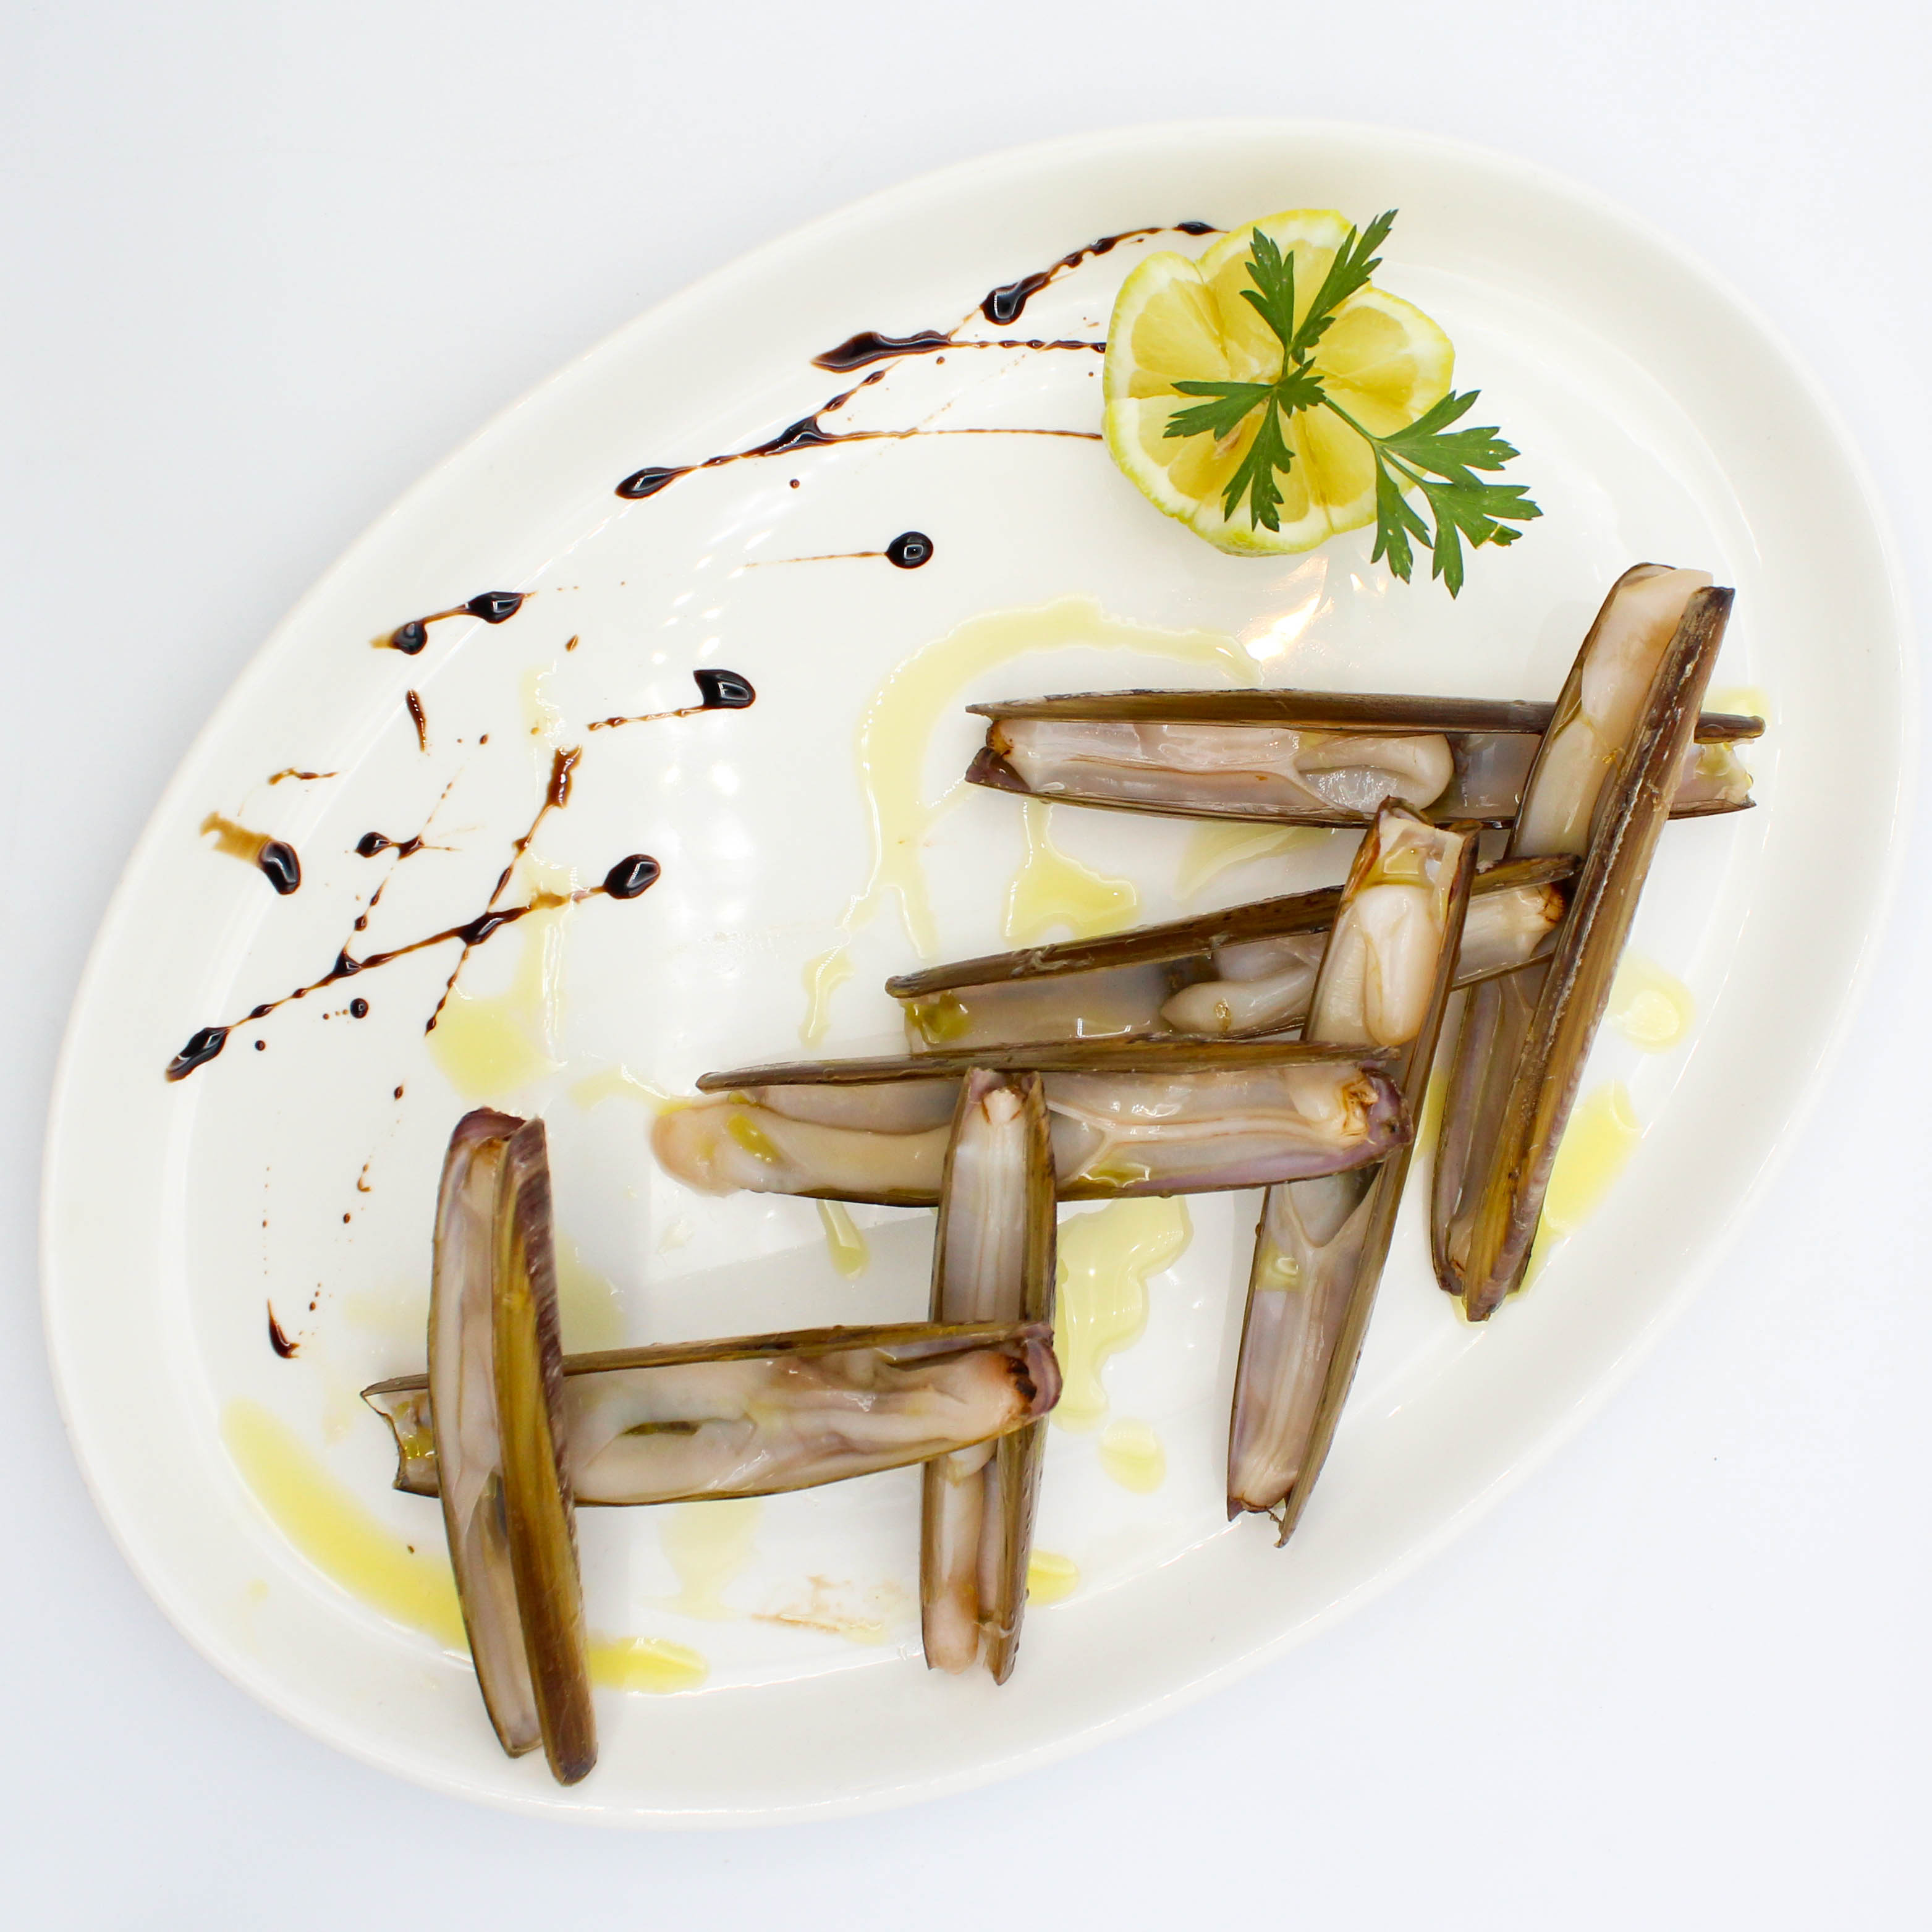 Grilled razor clams 